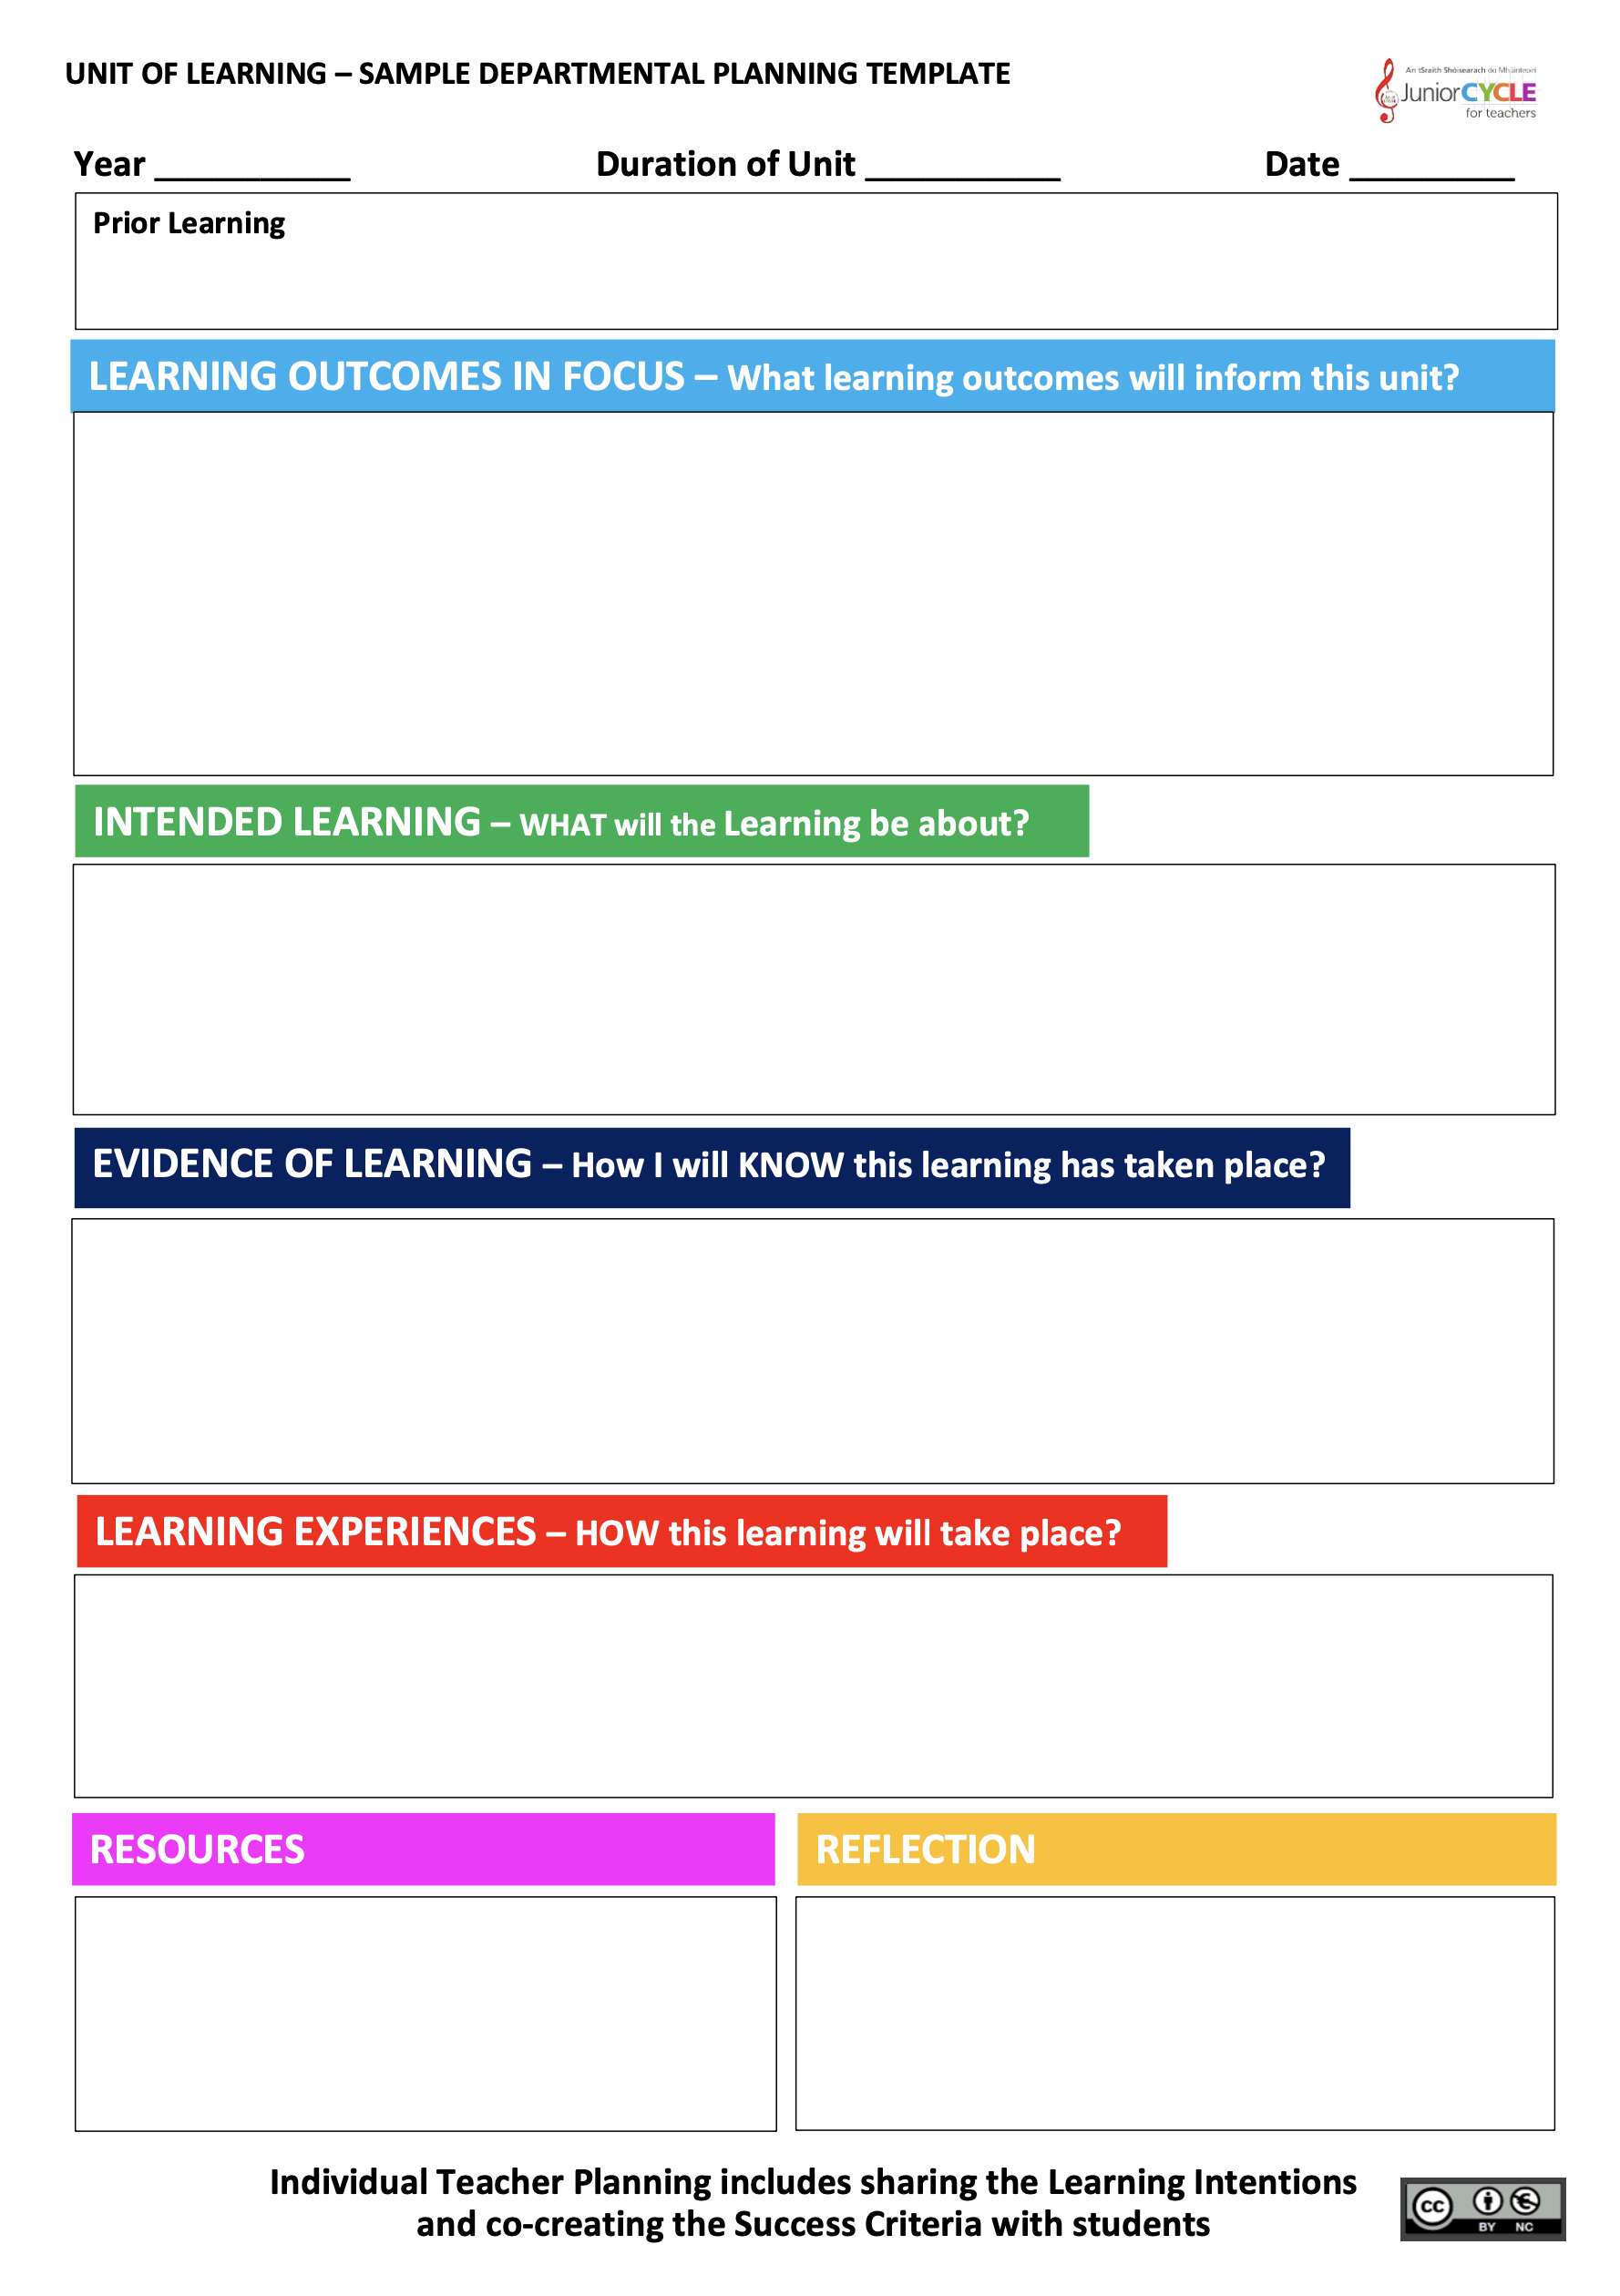 Sample Unit of Learning Planner - PDF PRINTABLE